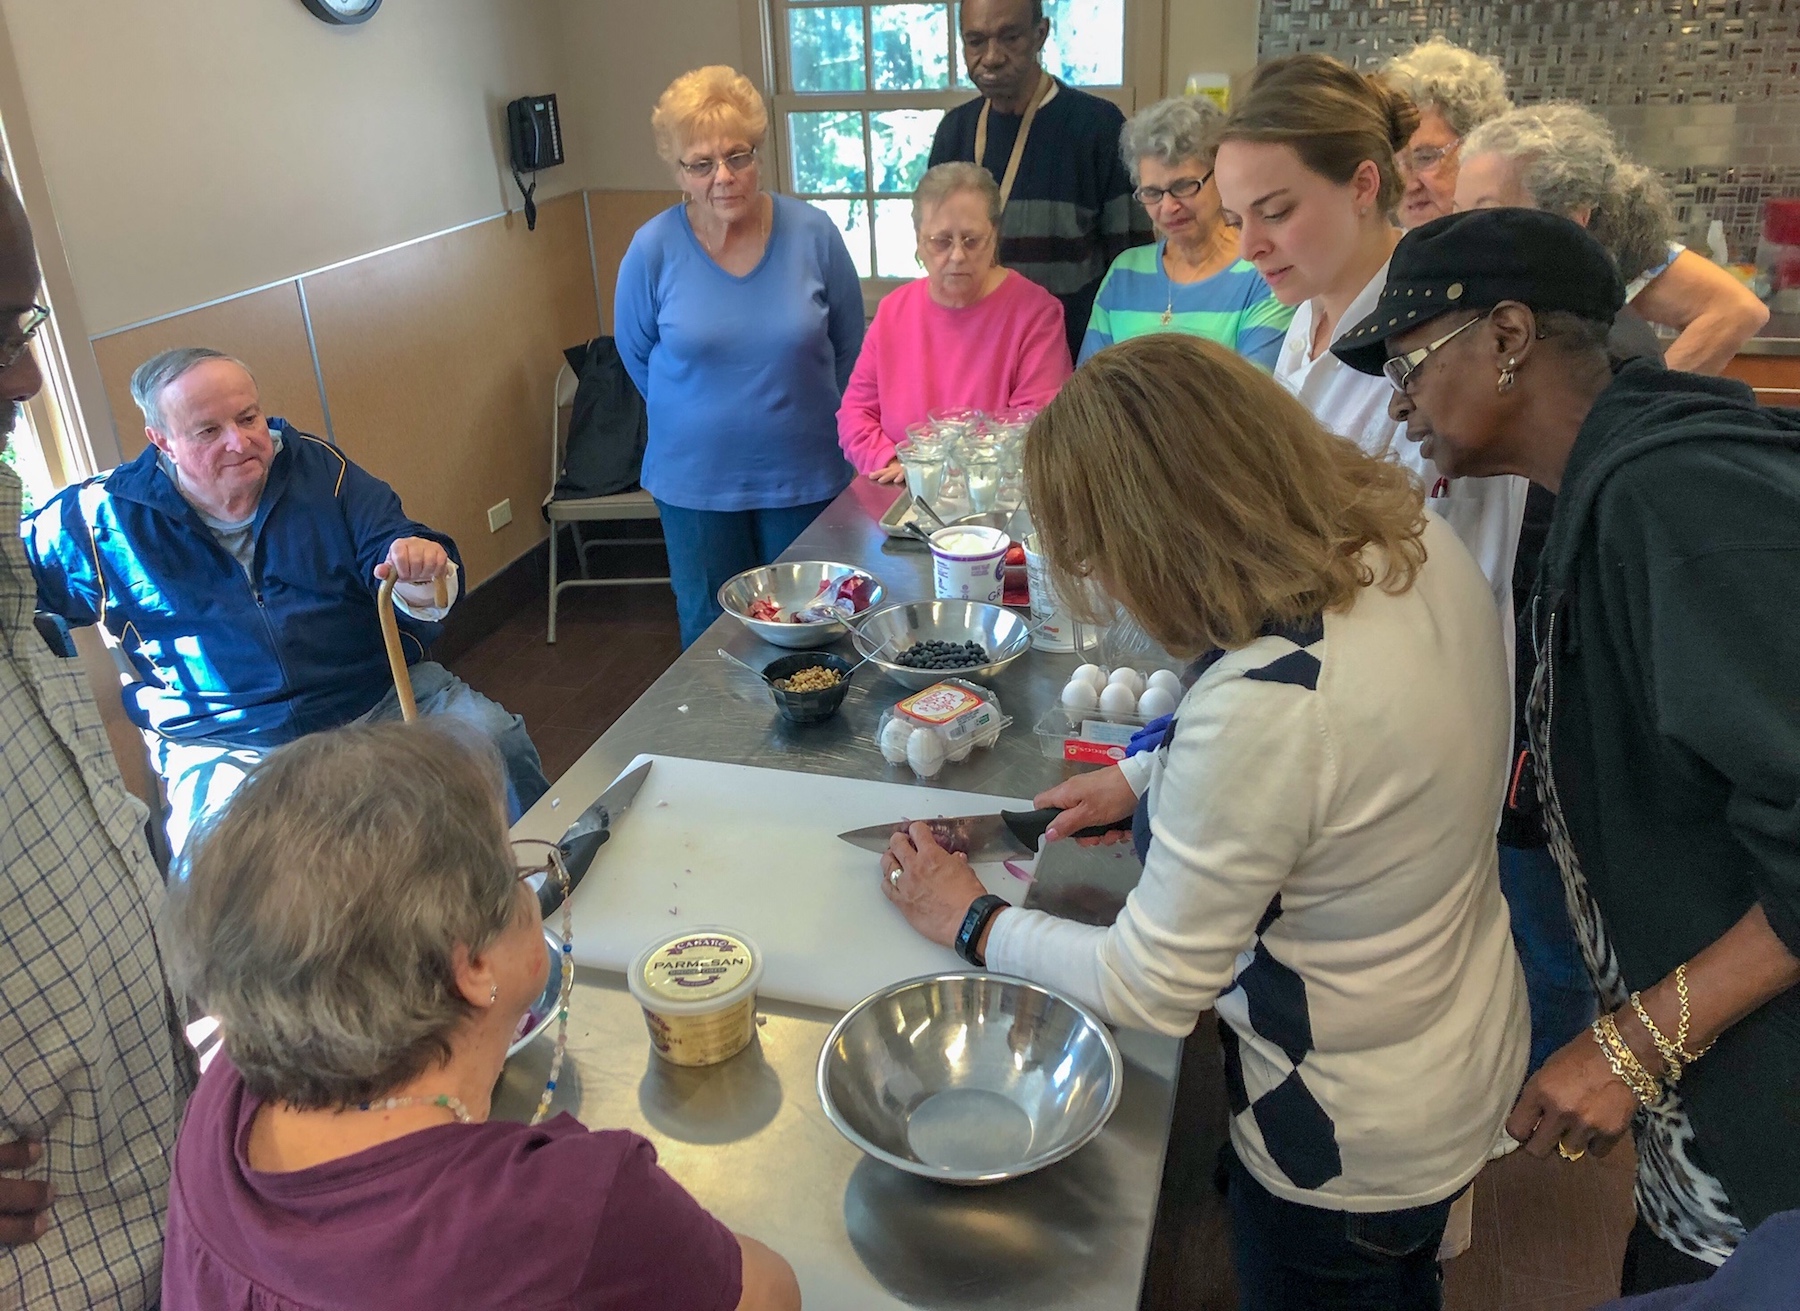 Members of the City of Peekskill’s Senior Nutrition Program try their hand at creating a health-supportive meal as part of the “Cooking for Health” program.